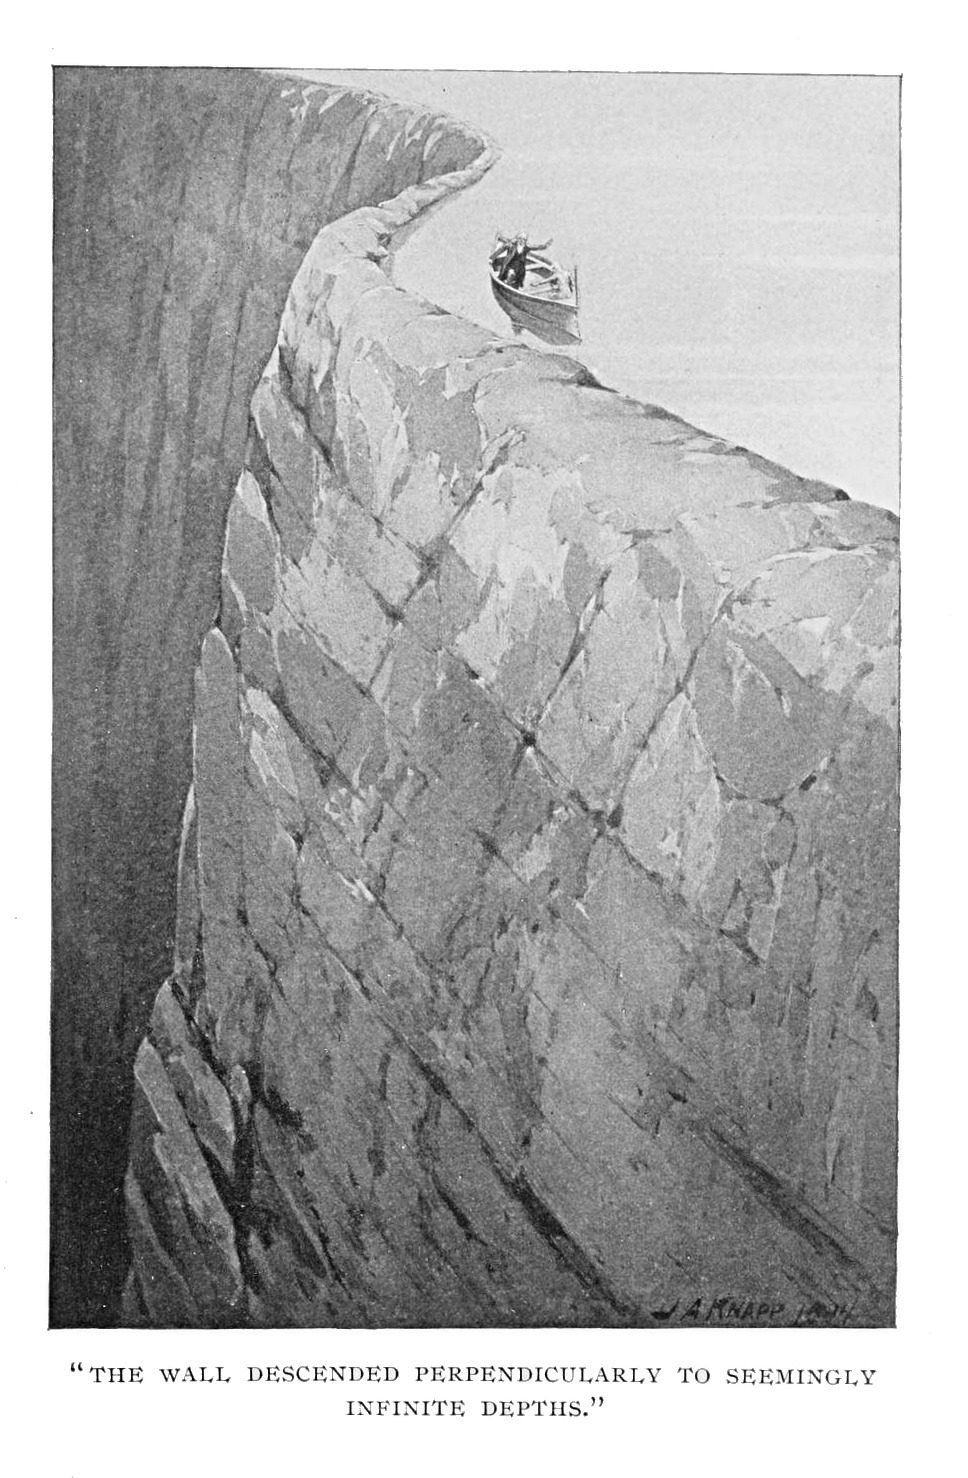 The Man and his eyeless guide aboard the boat on the underground lake, passing near a deep chasm, captioned as THE WALL DESCENDED PERPENDICULARLY TO SEEMINGLY INFINITE DEPTHS, illustration by J. Augustus Knapp, from Lloyd's "Etidorhpa" (1895), page 229.